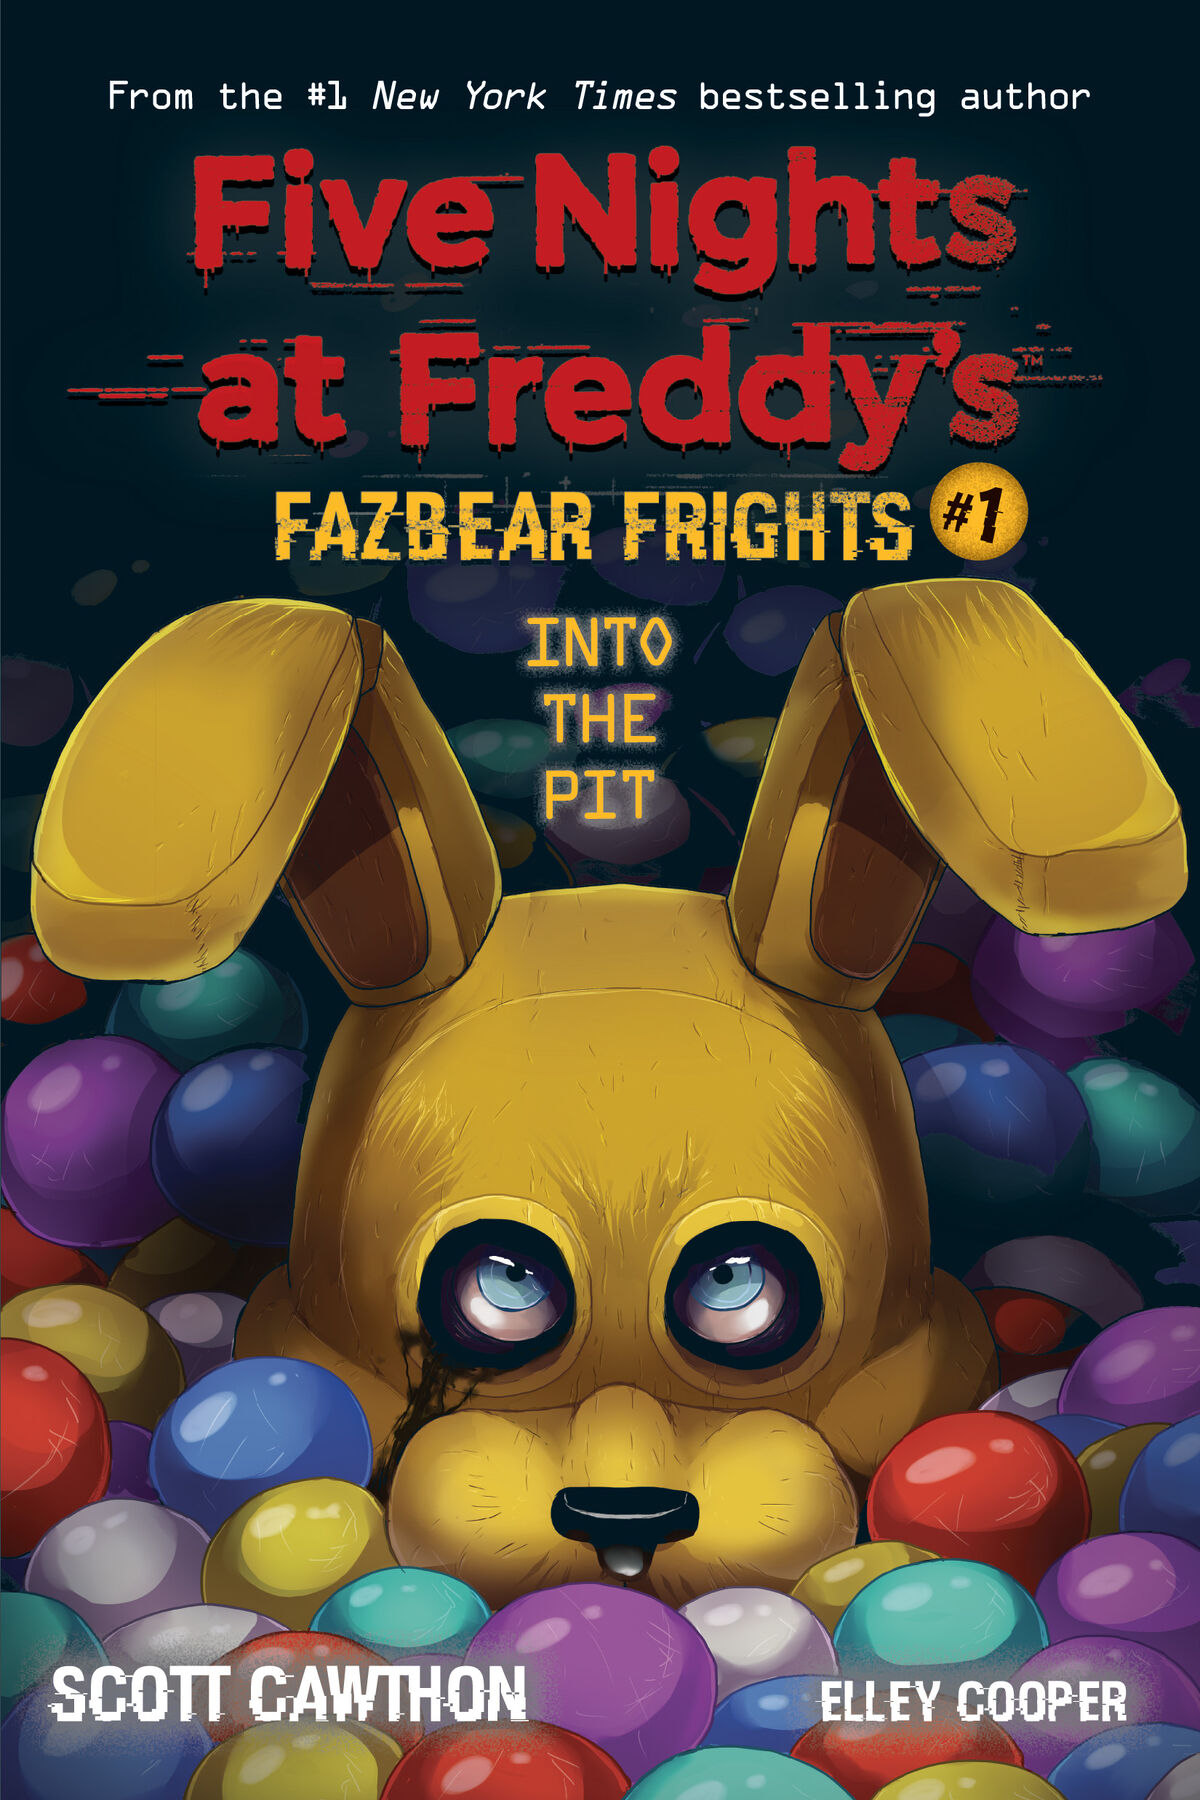 Five Nights at Freddy's™: Tales from the Pizzaplex #7: Tiger Rock by Scott  Cawthon ; Kelly Parra ; Andrea Waggener (Paperback)